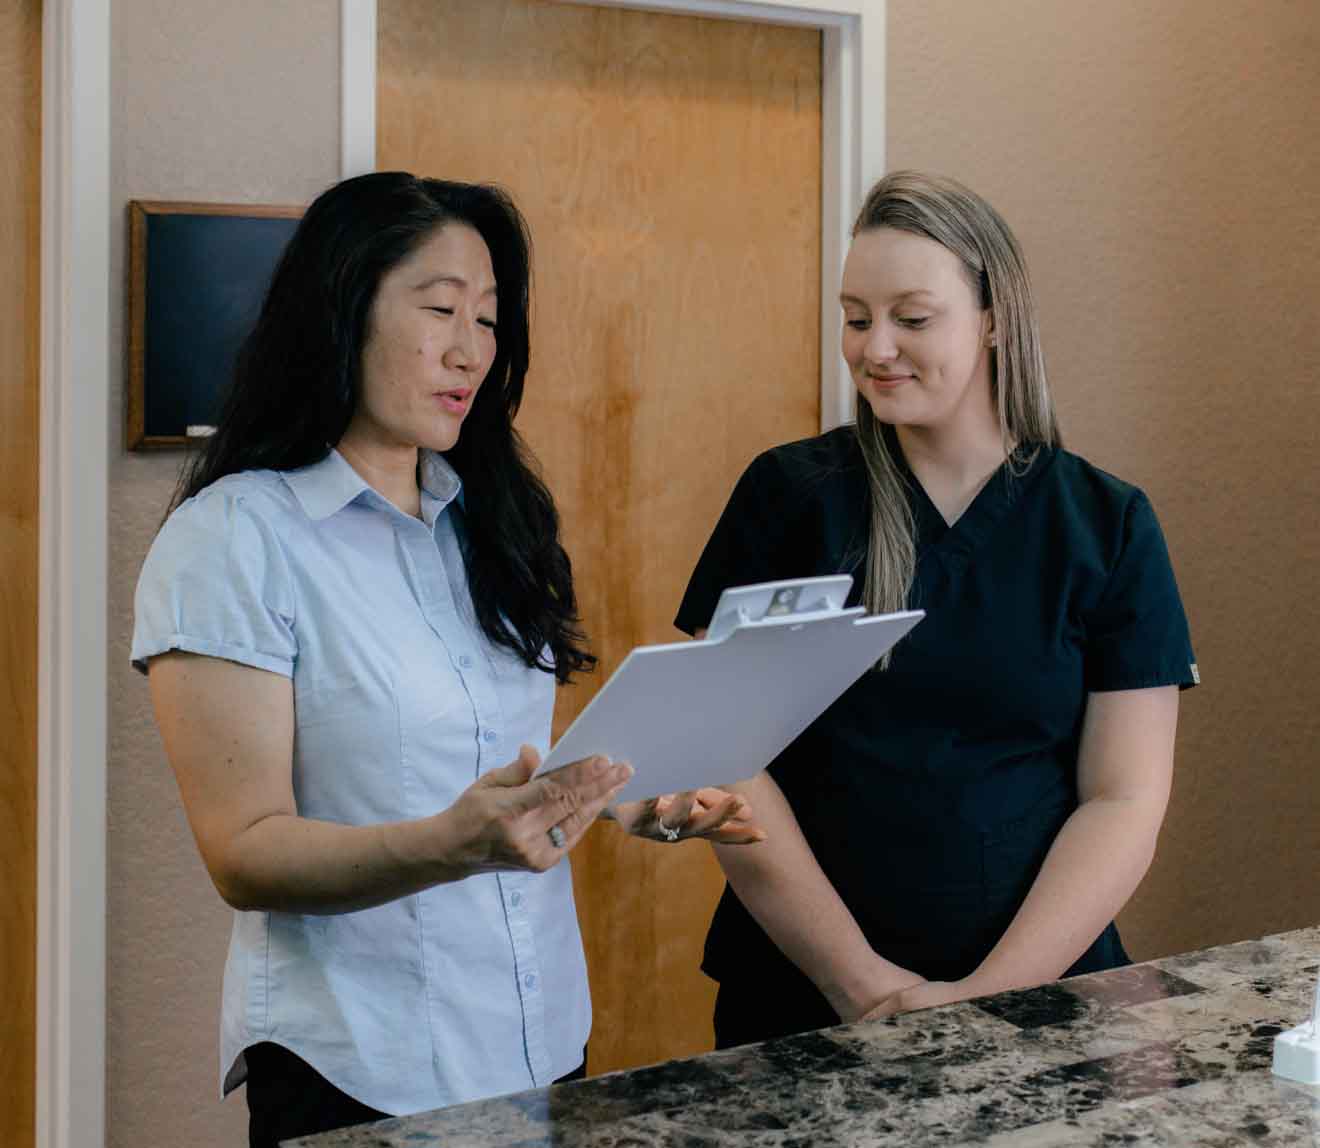 Photo of Nurse Practitioner talking to a Medical Assistant